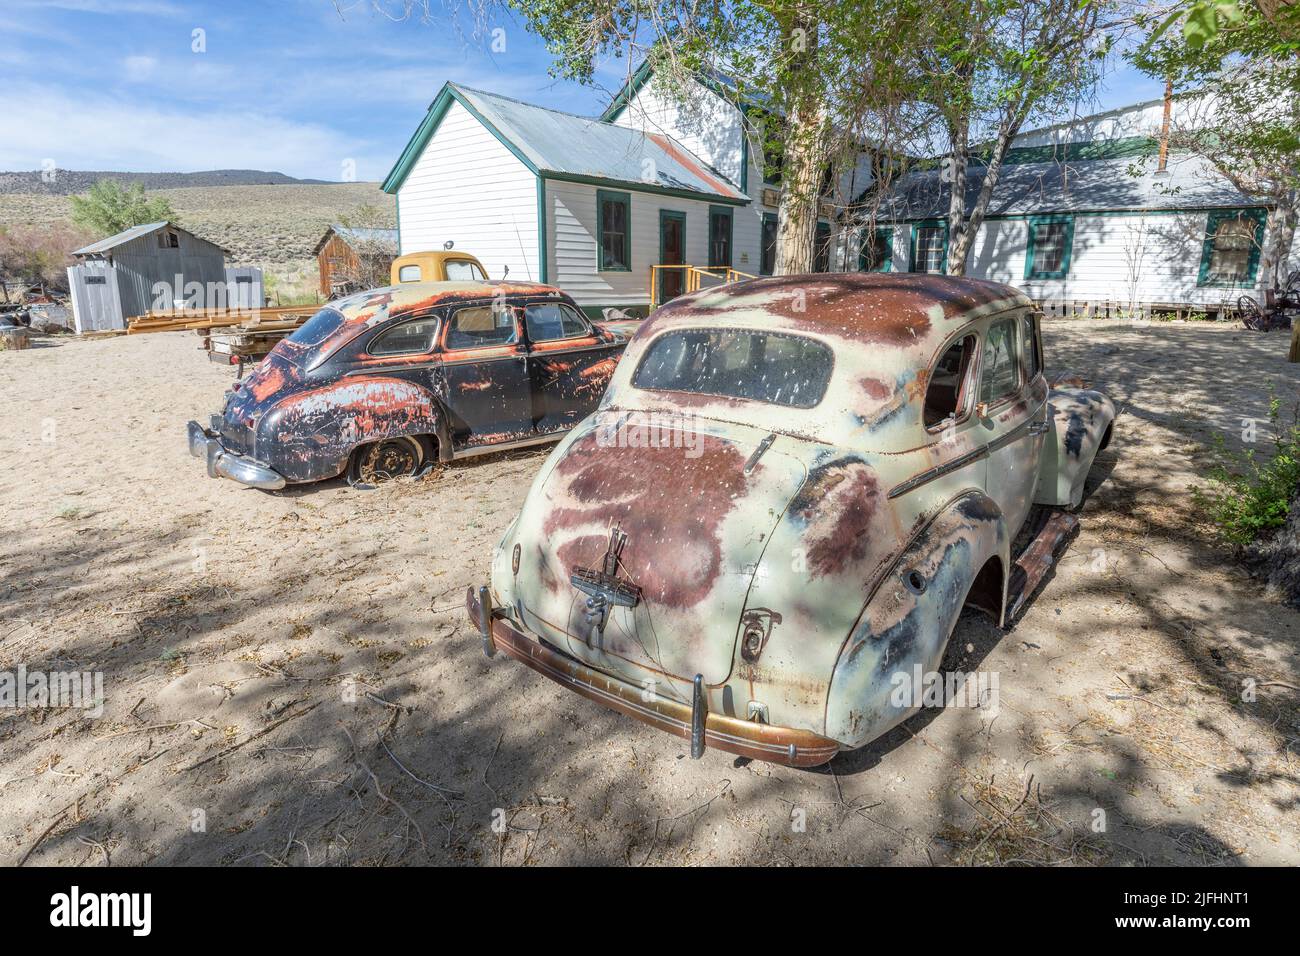 Benton hot Springs, USA - June 3, 2022: old vintage rusty car wrecks at an old abandoned farm in USA Stock Photo